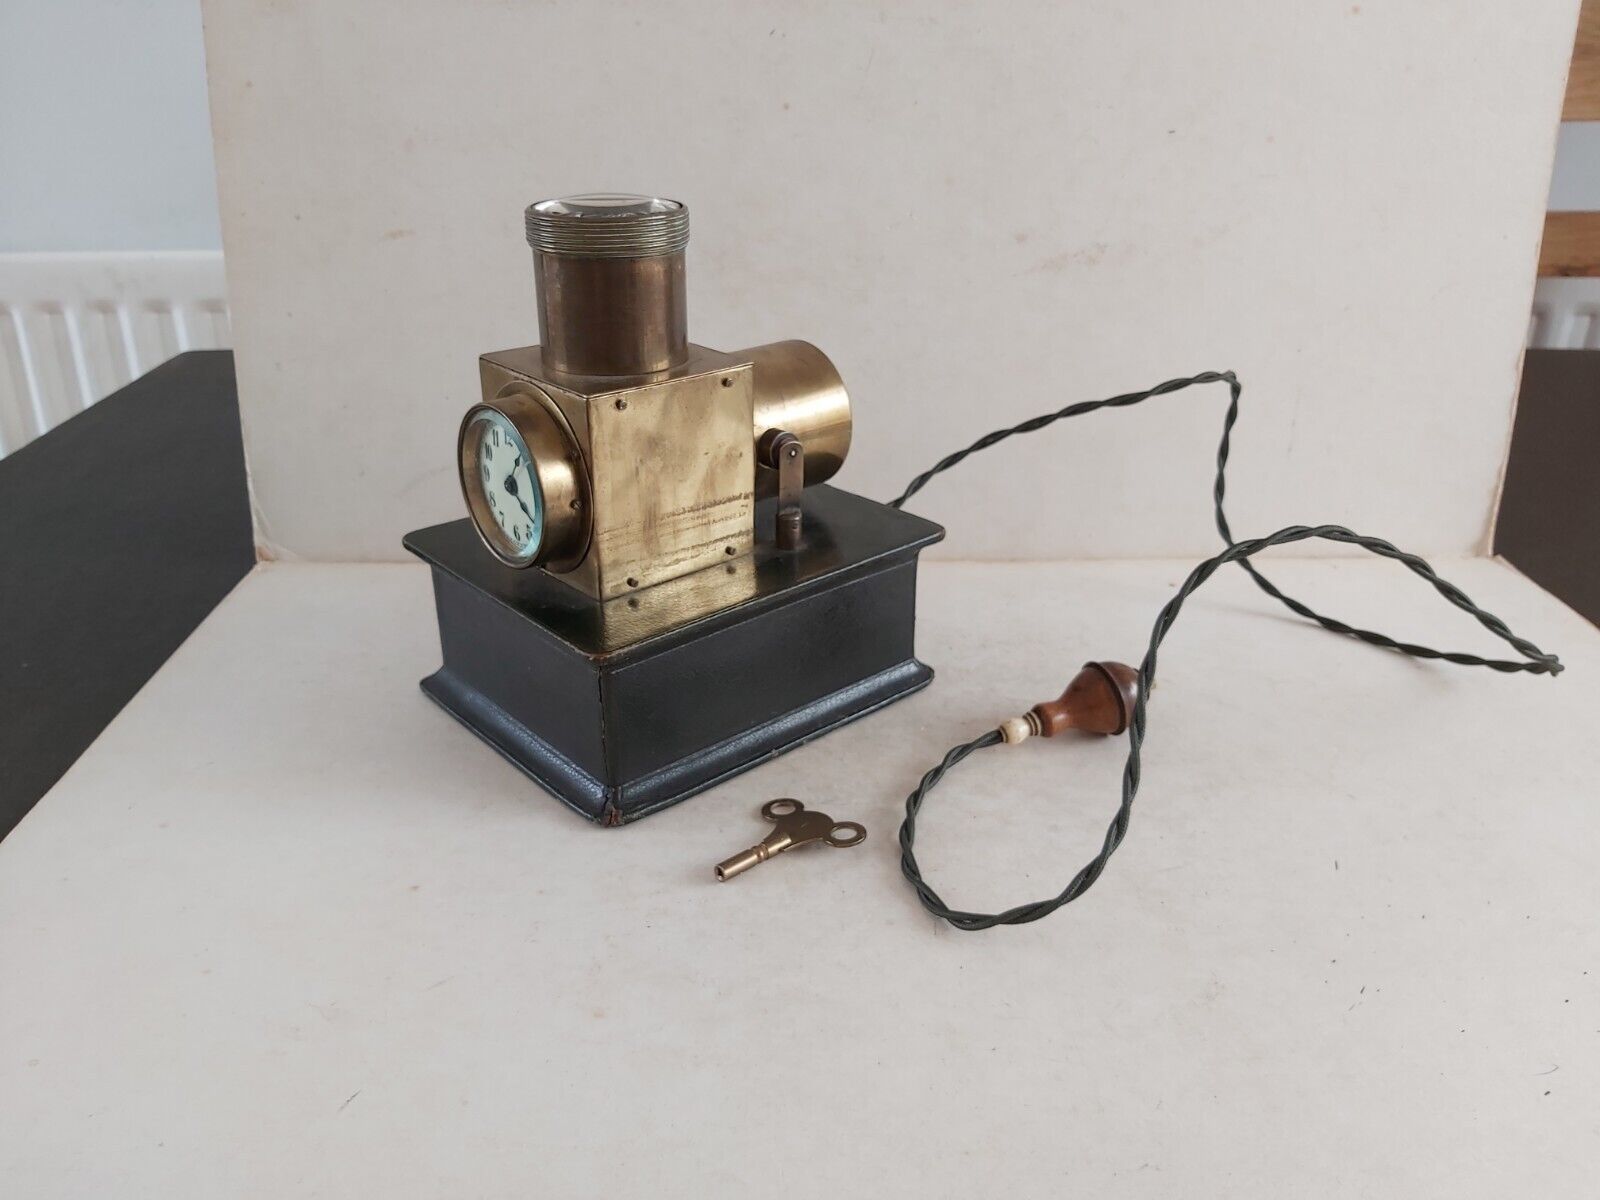 Unusual Early 1900s Brass Night Projection Or Brothel Clock Working Order